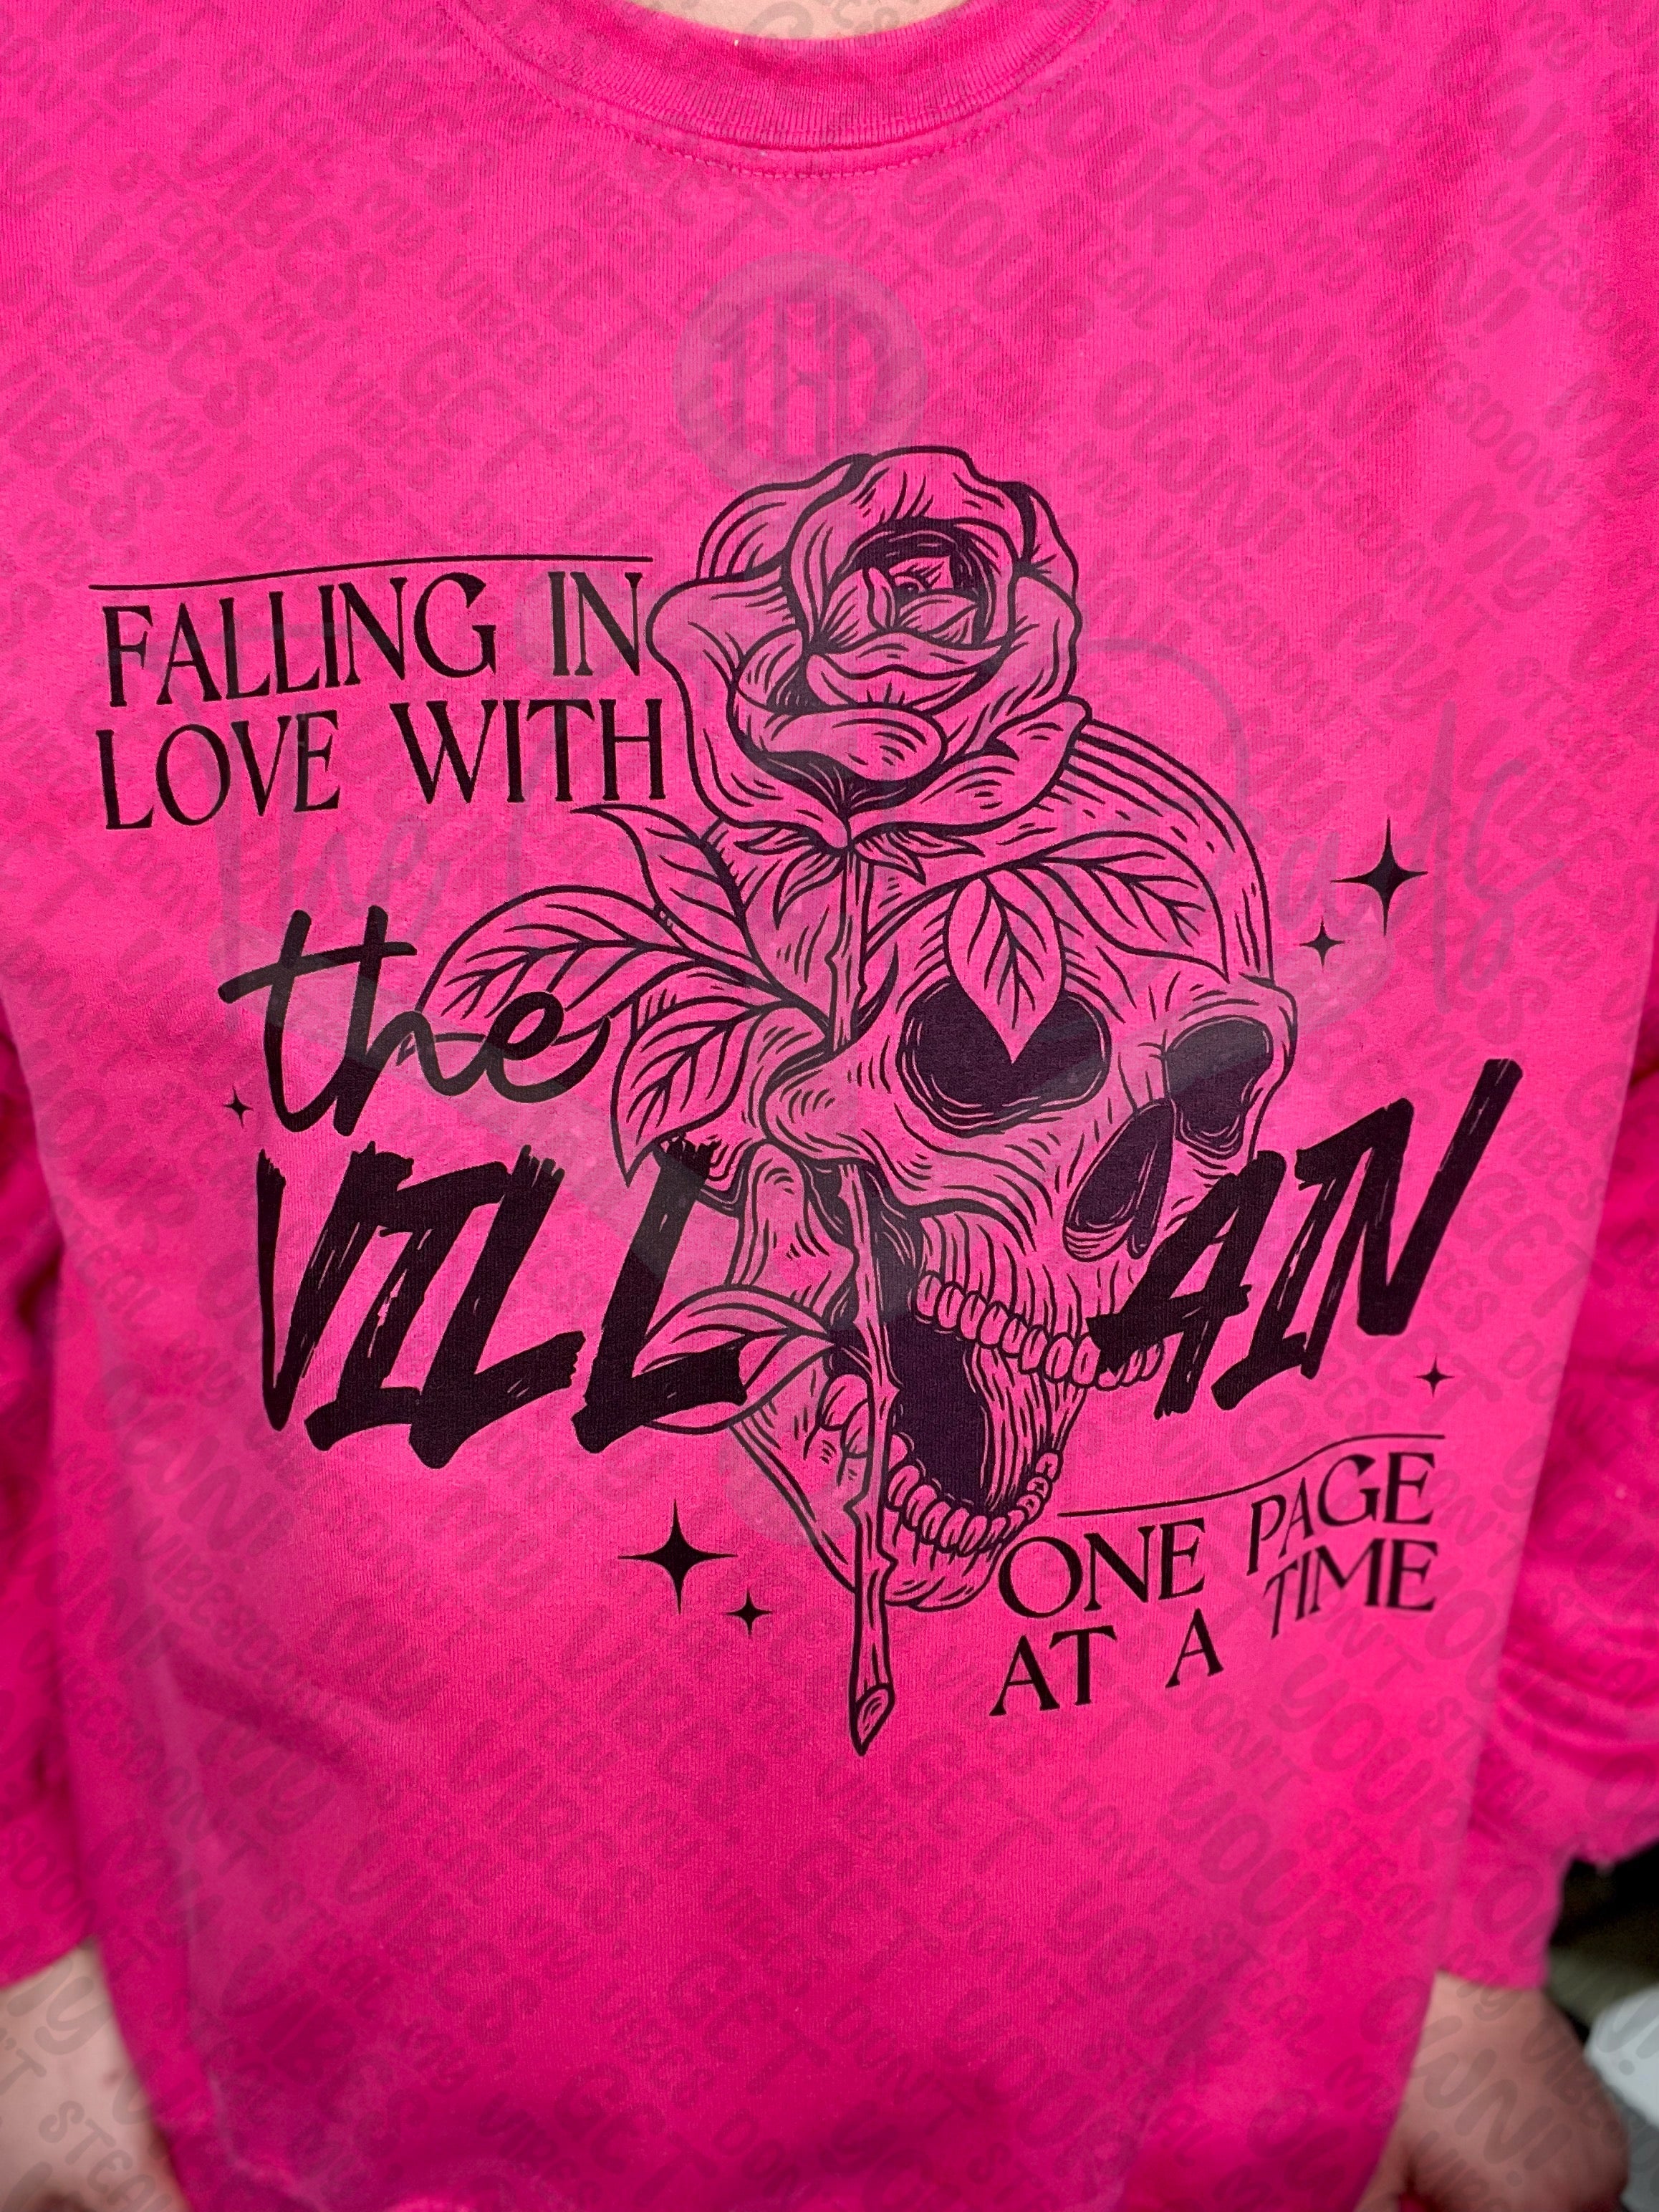 Falling In Love With The Villain Top Design